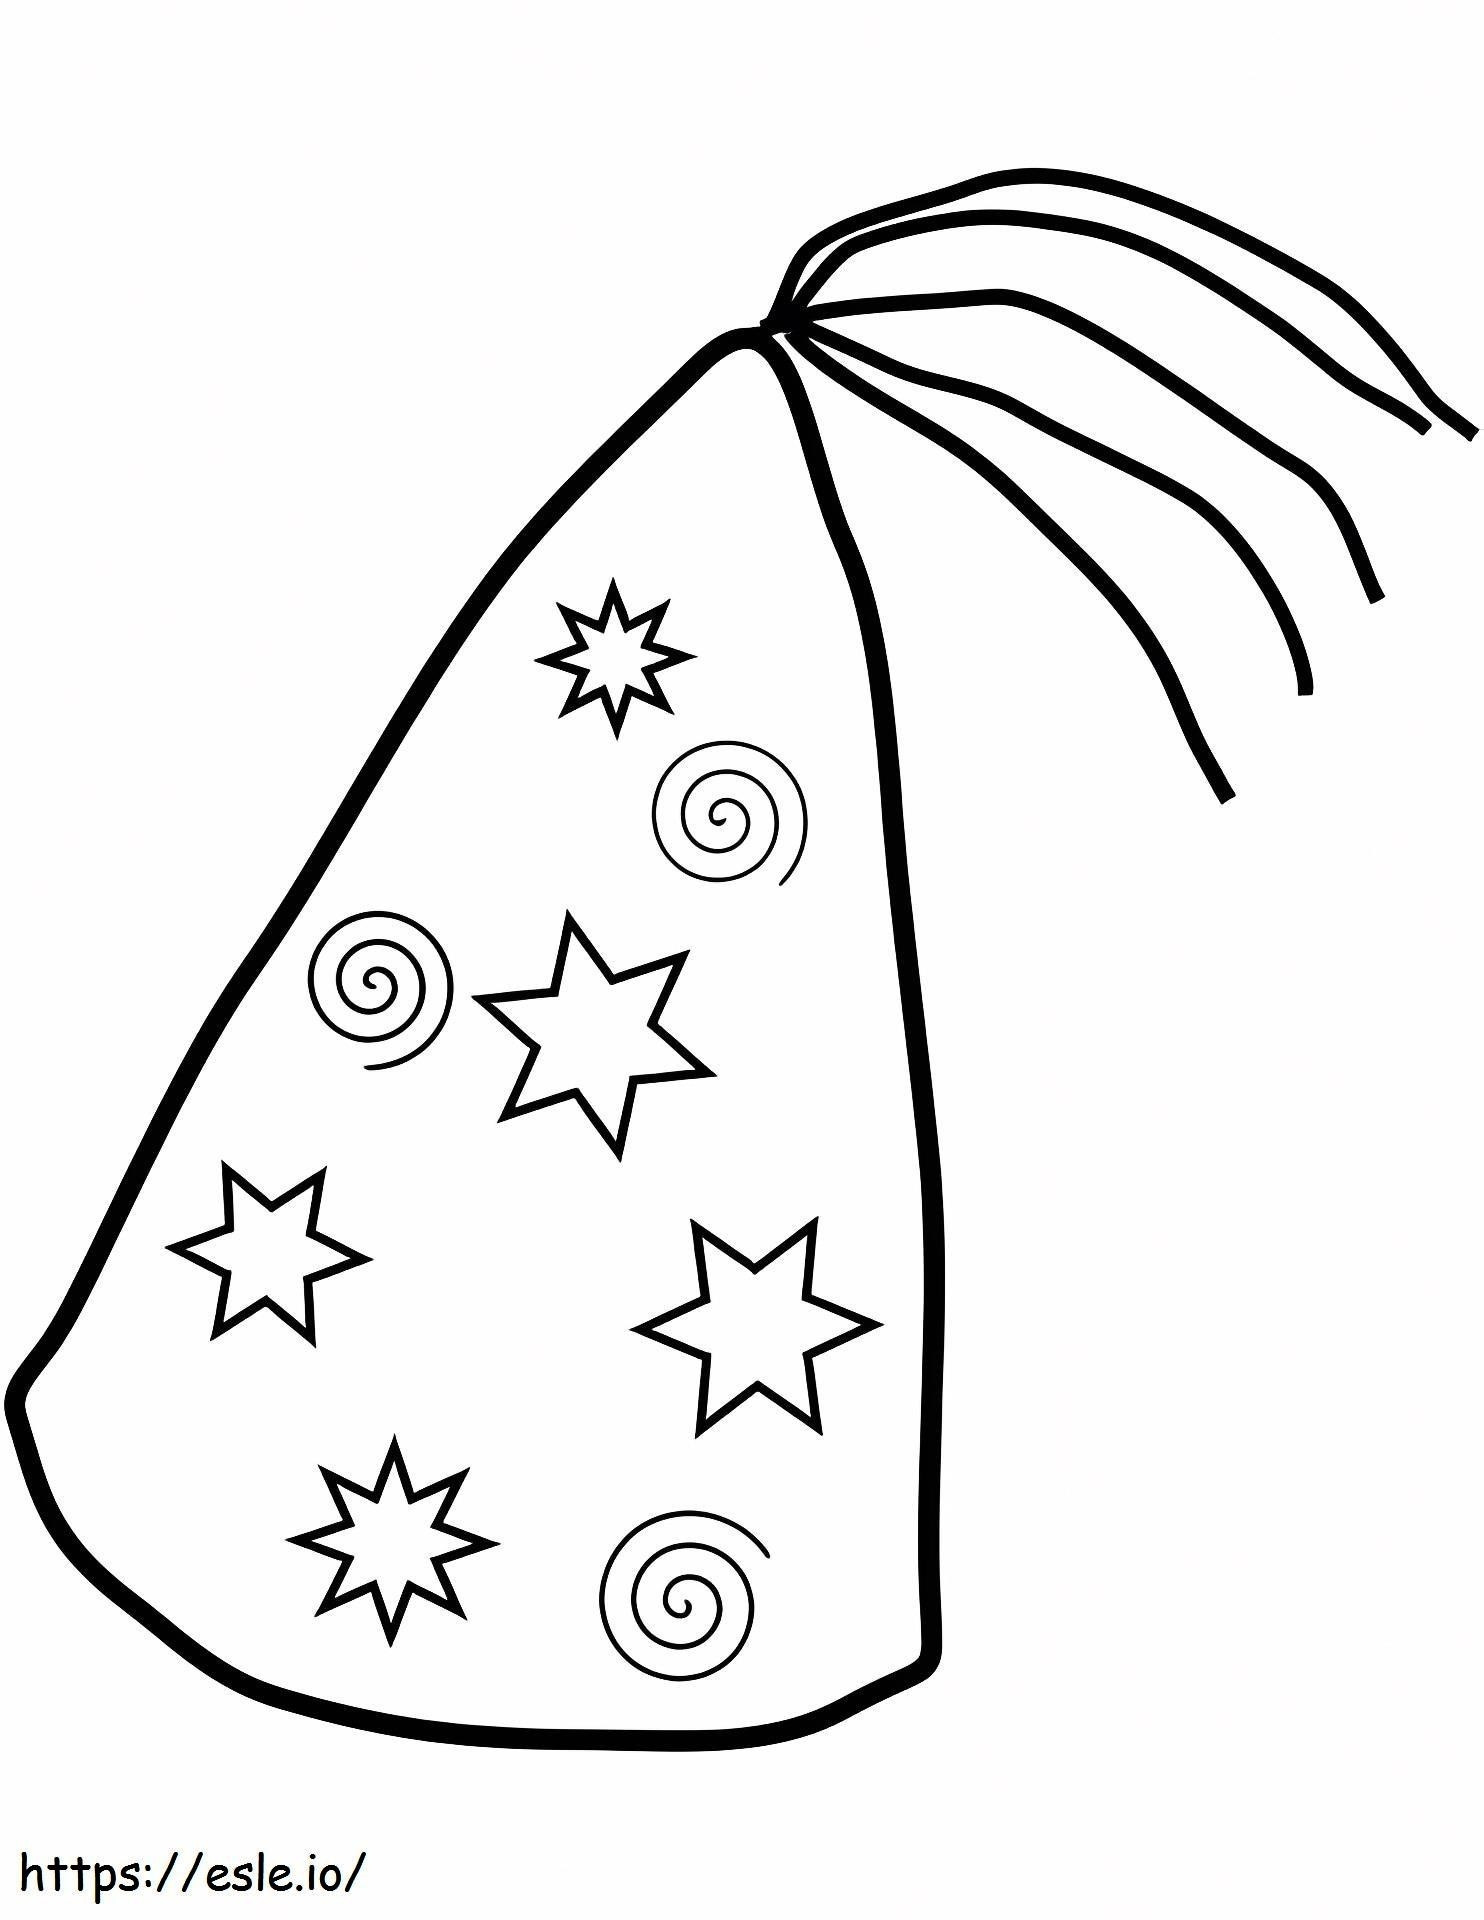 1559614812 A Party Hat A4 coloring page